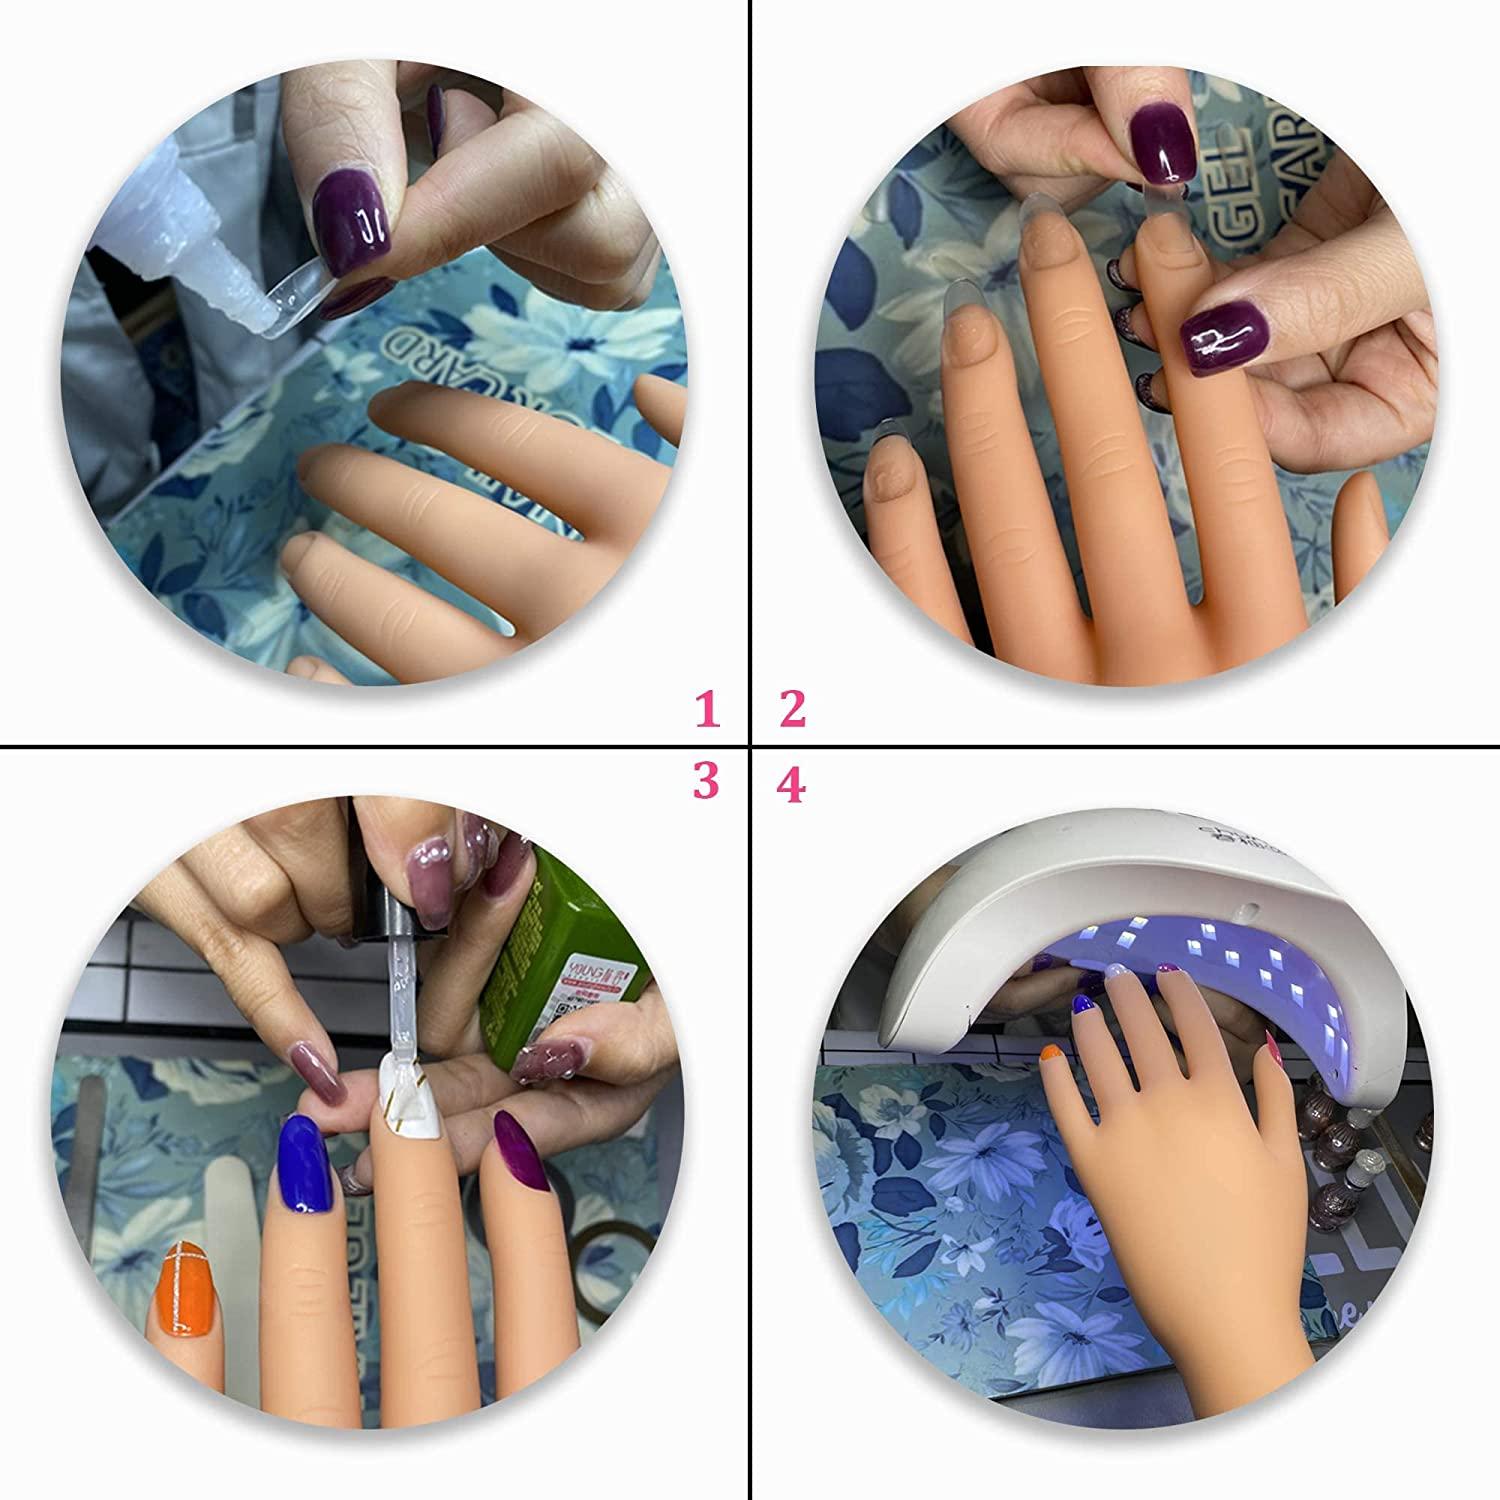 GULALUUK Hand for Nail Practice Fake Hands to Practice Fake Nails Practice  Hand for Acrylic Nails Flexible Hand for Nail Practice Kit Nai